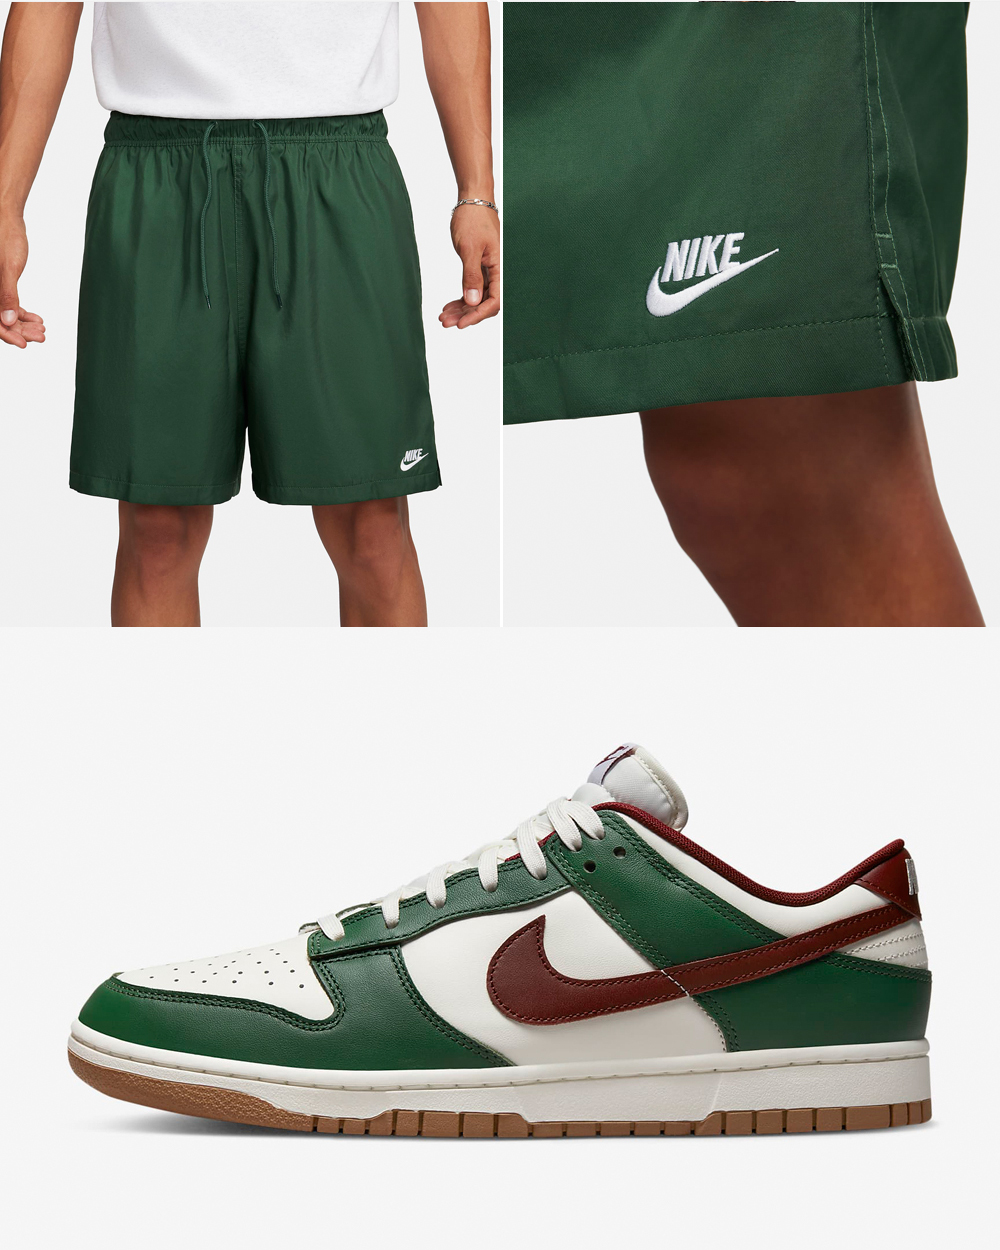 Nike Dunk Low Gorge Green Shorts Outfit